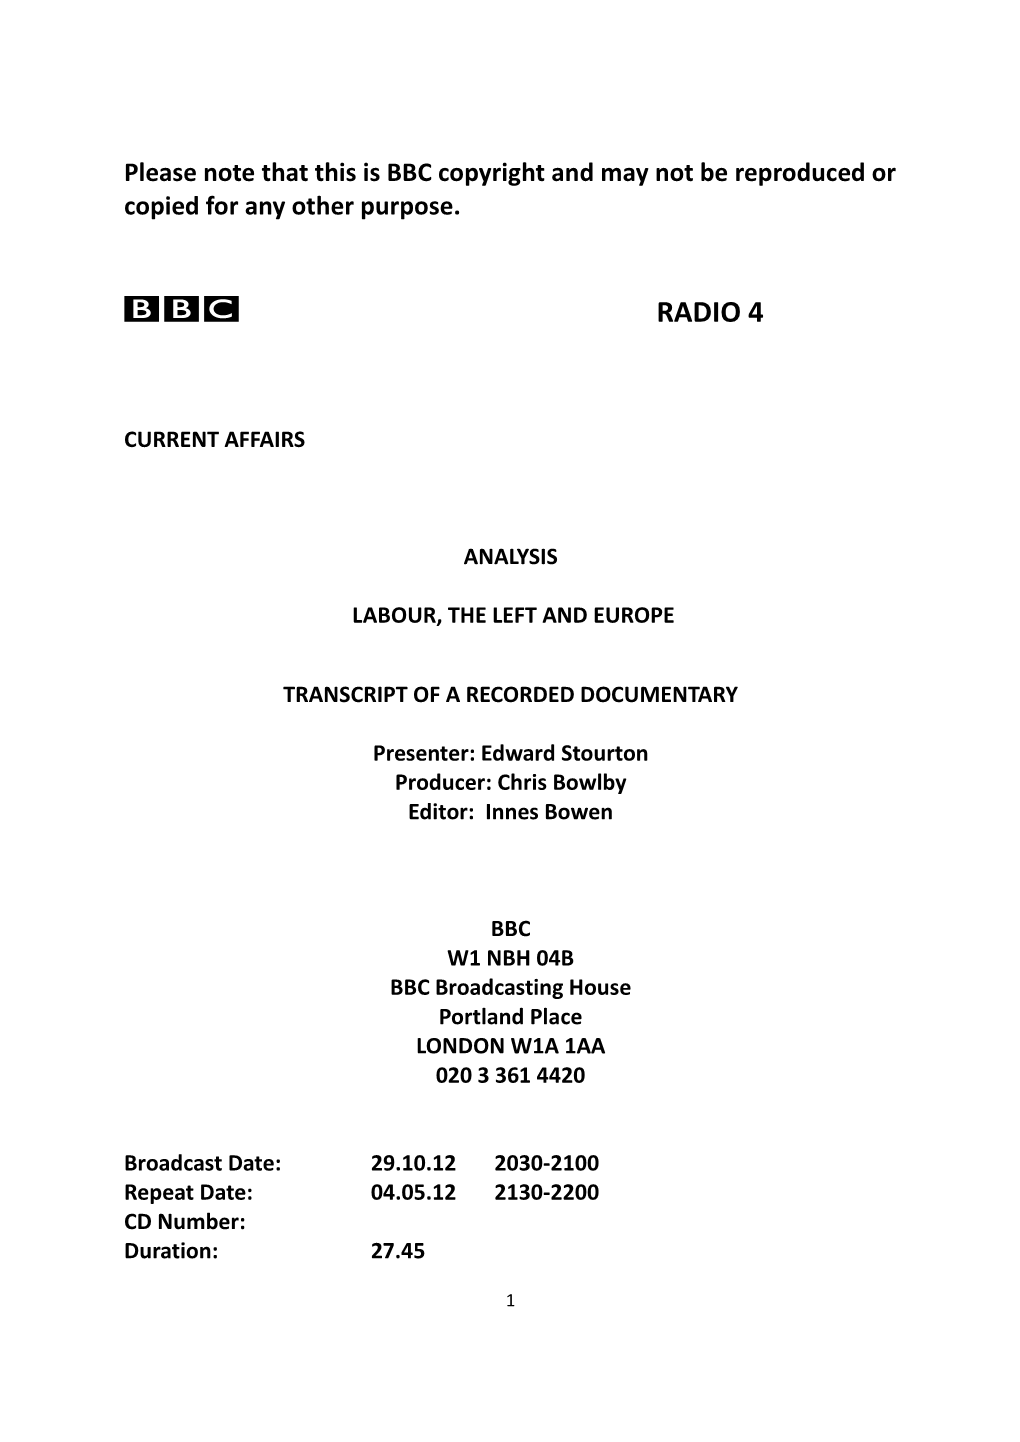 Please Note That This Is BBC Copyright and May Not Be Reproduced Or Copied for Any Other Purpose